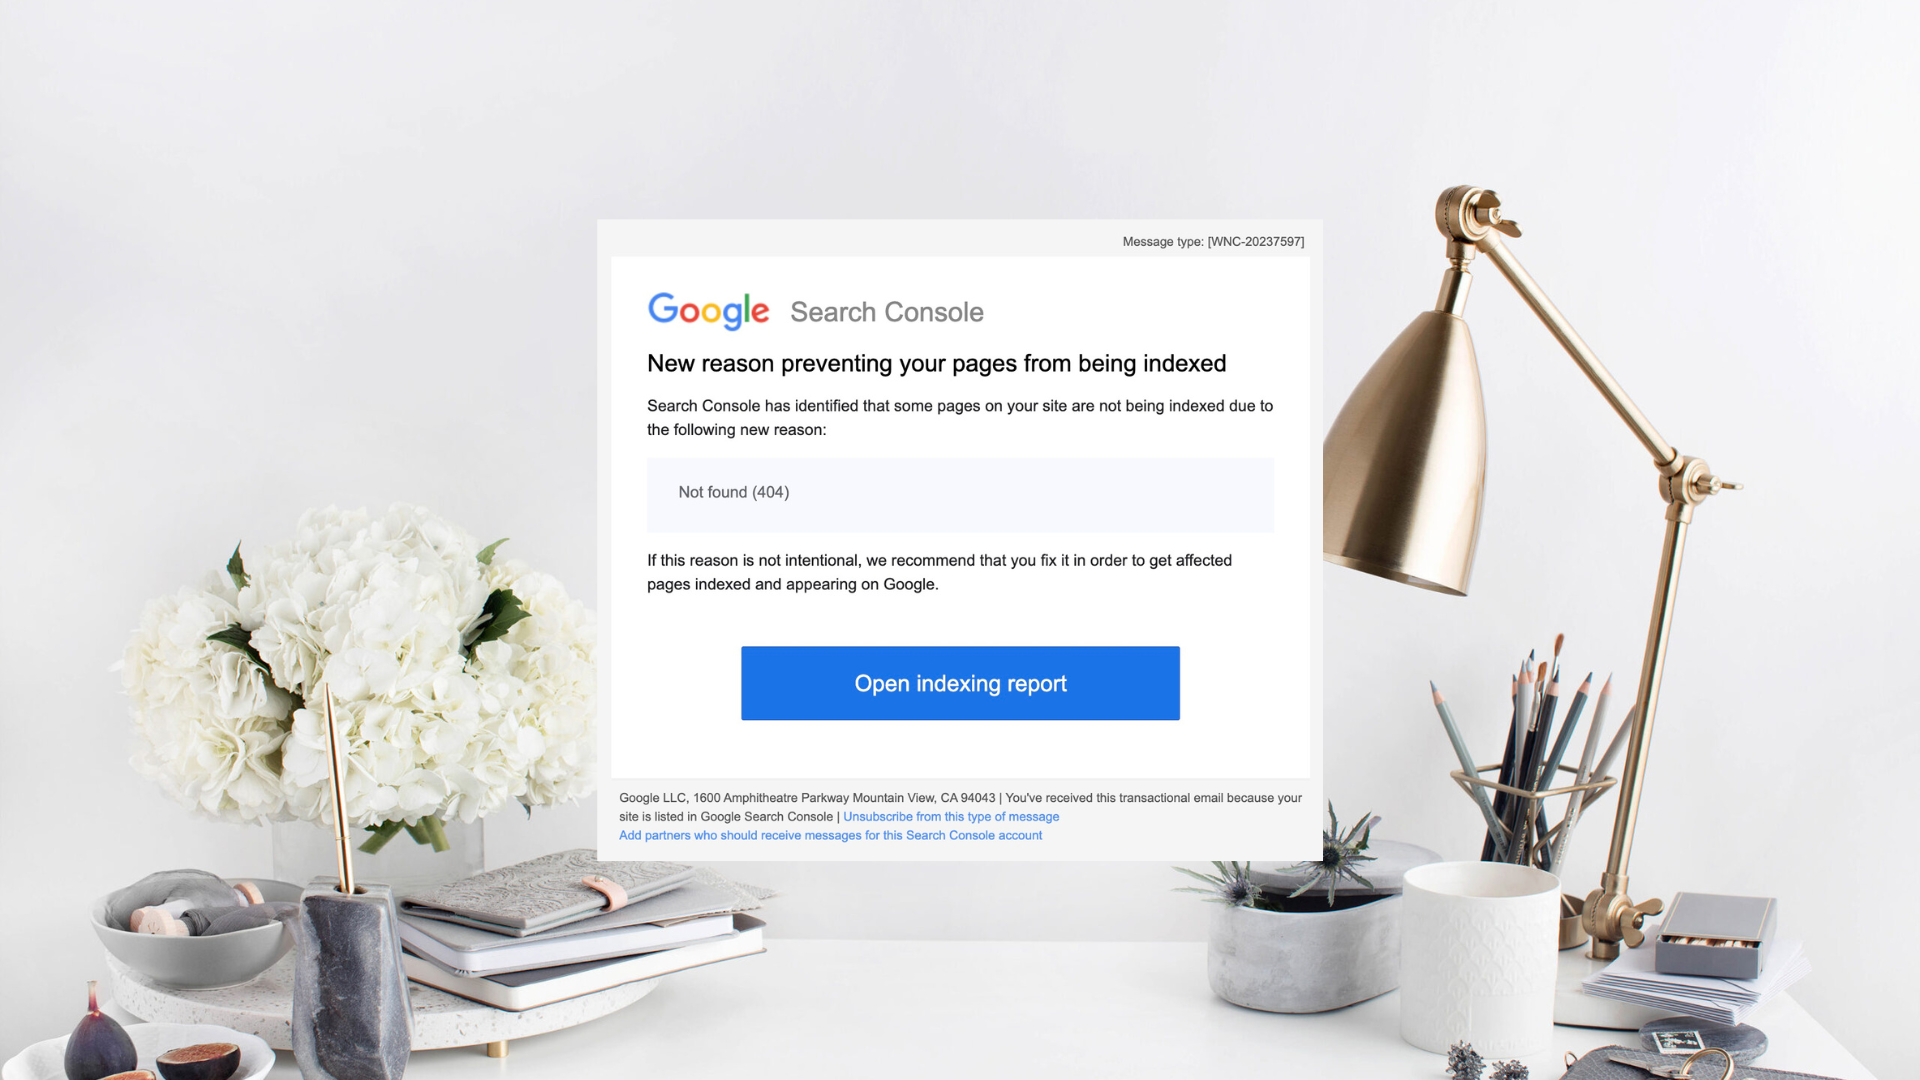 Google search console error message emails and how to fix google search console errors